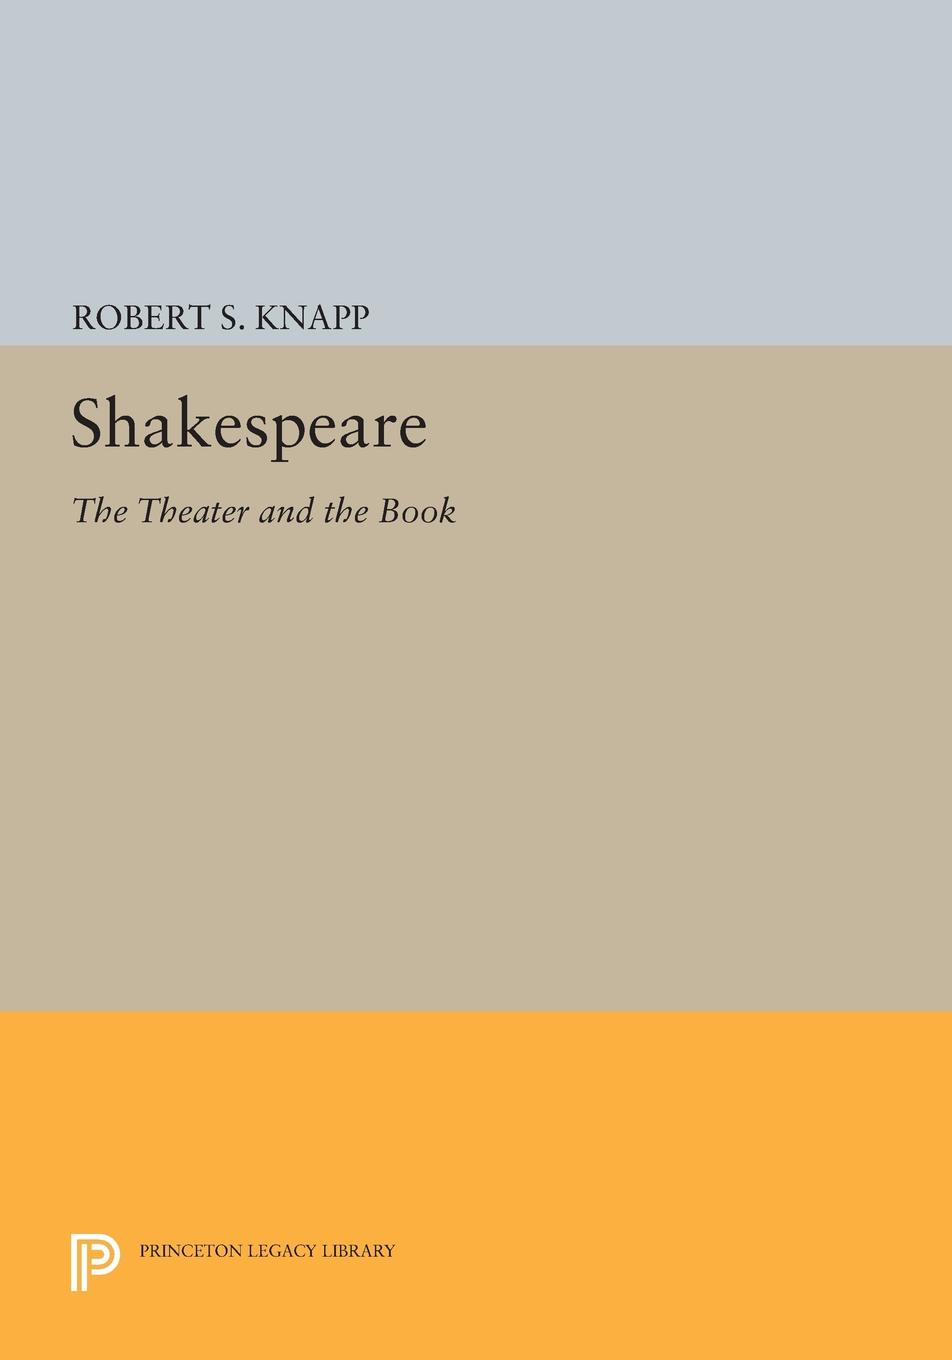 Shakespeare. The Theater and the Book